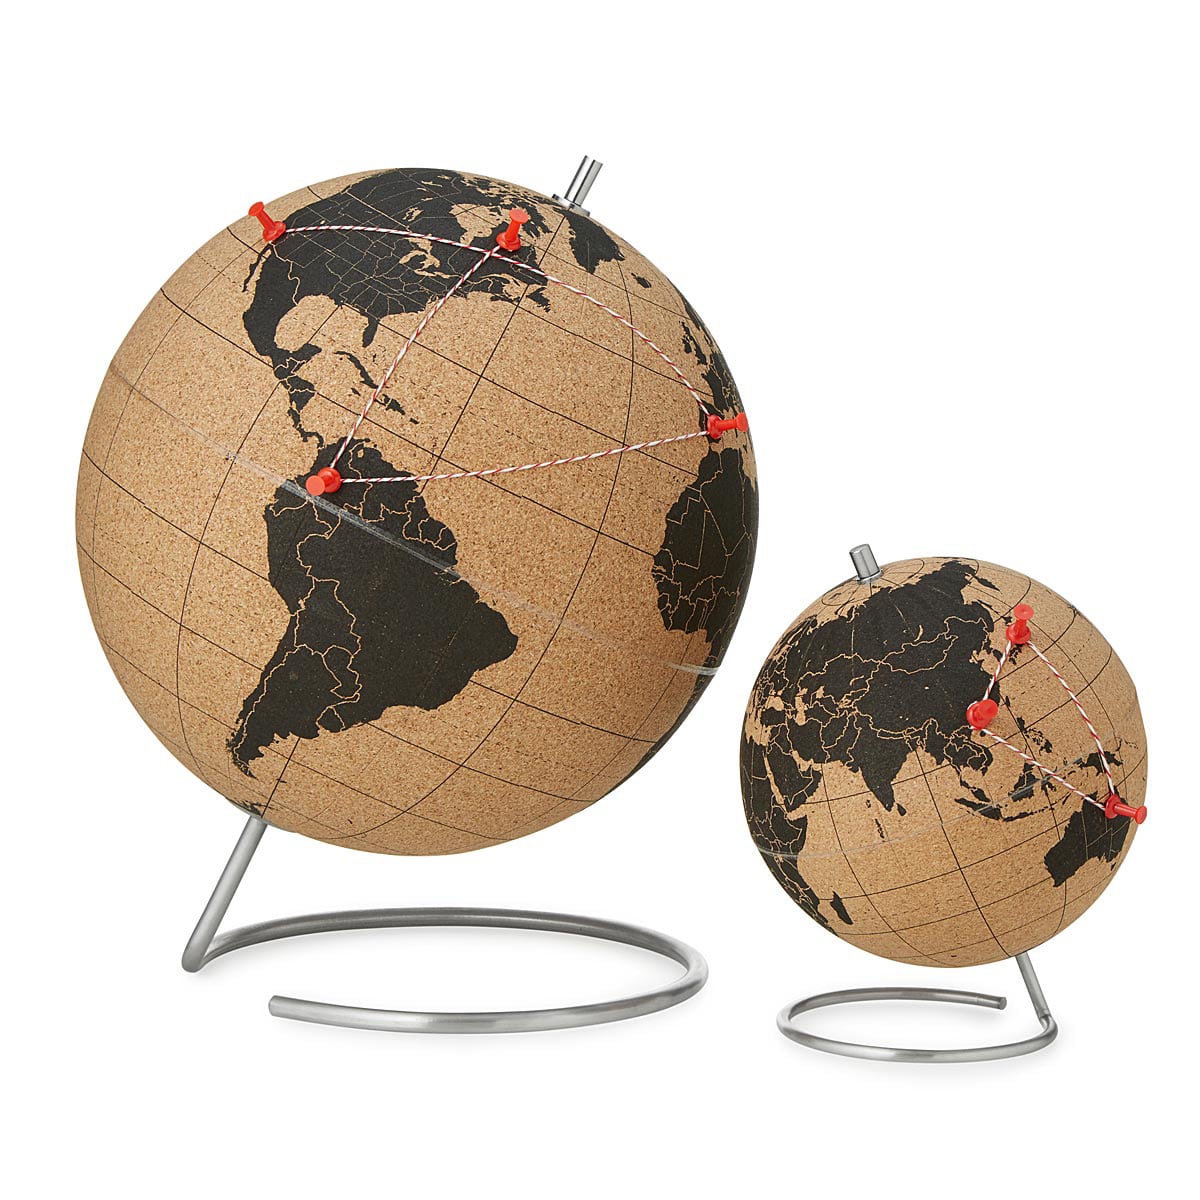 Travel Gifts for Travelers: Cork Globe